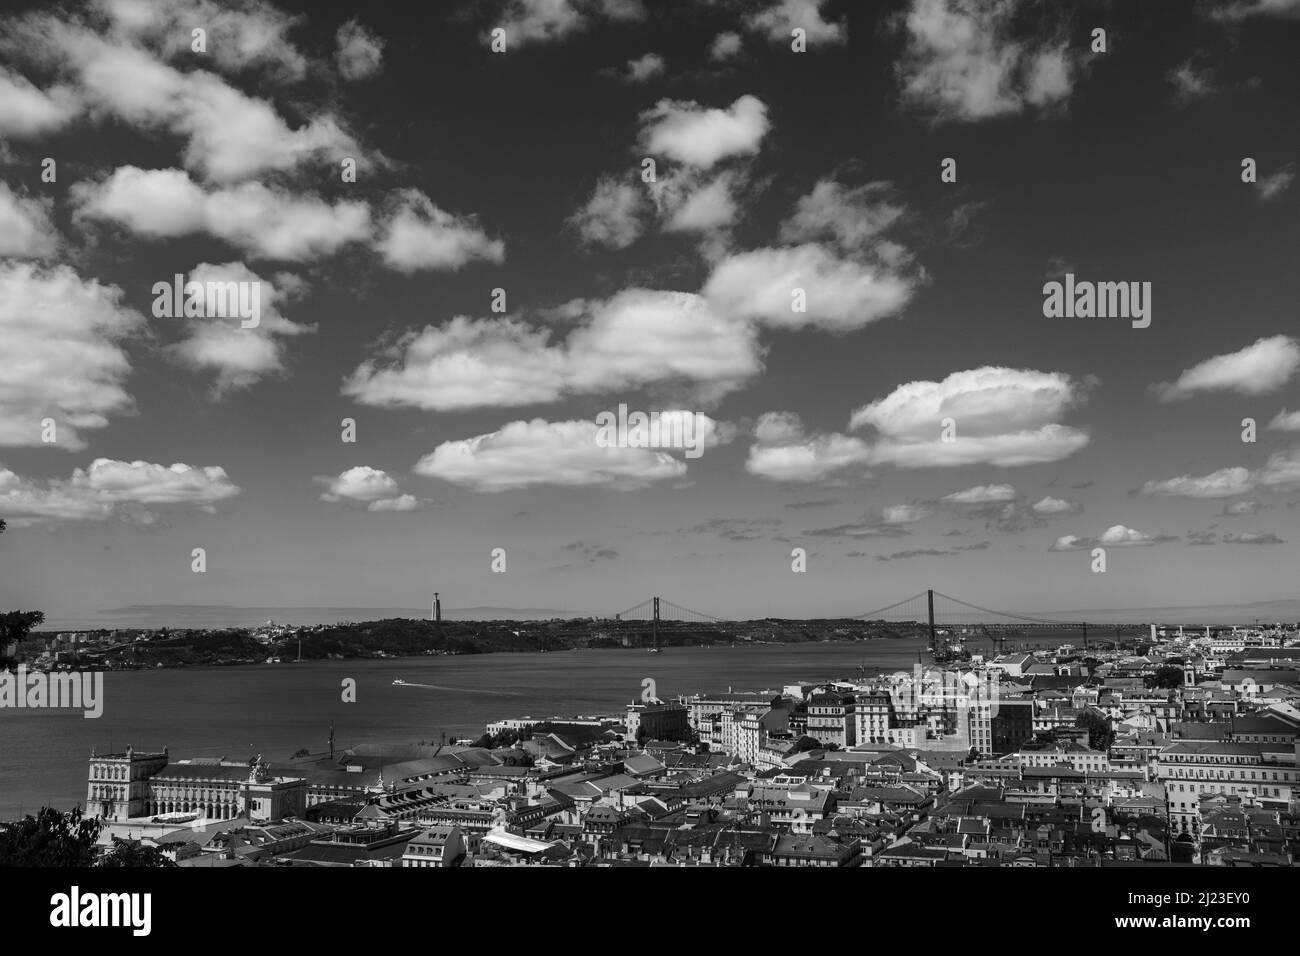 Lisbon historic city centre and the Tagus river cityscape with cloudy sky Stock Photo